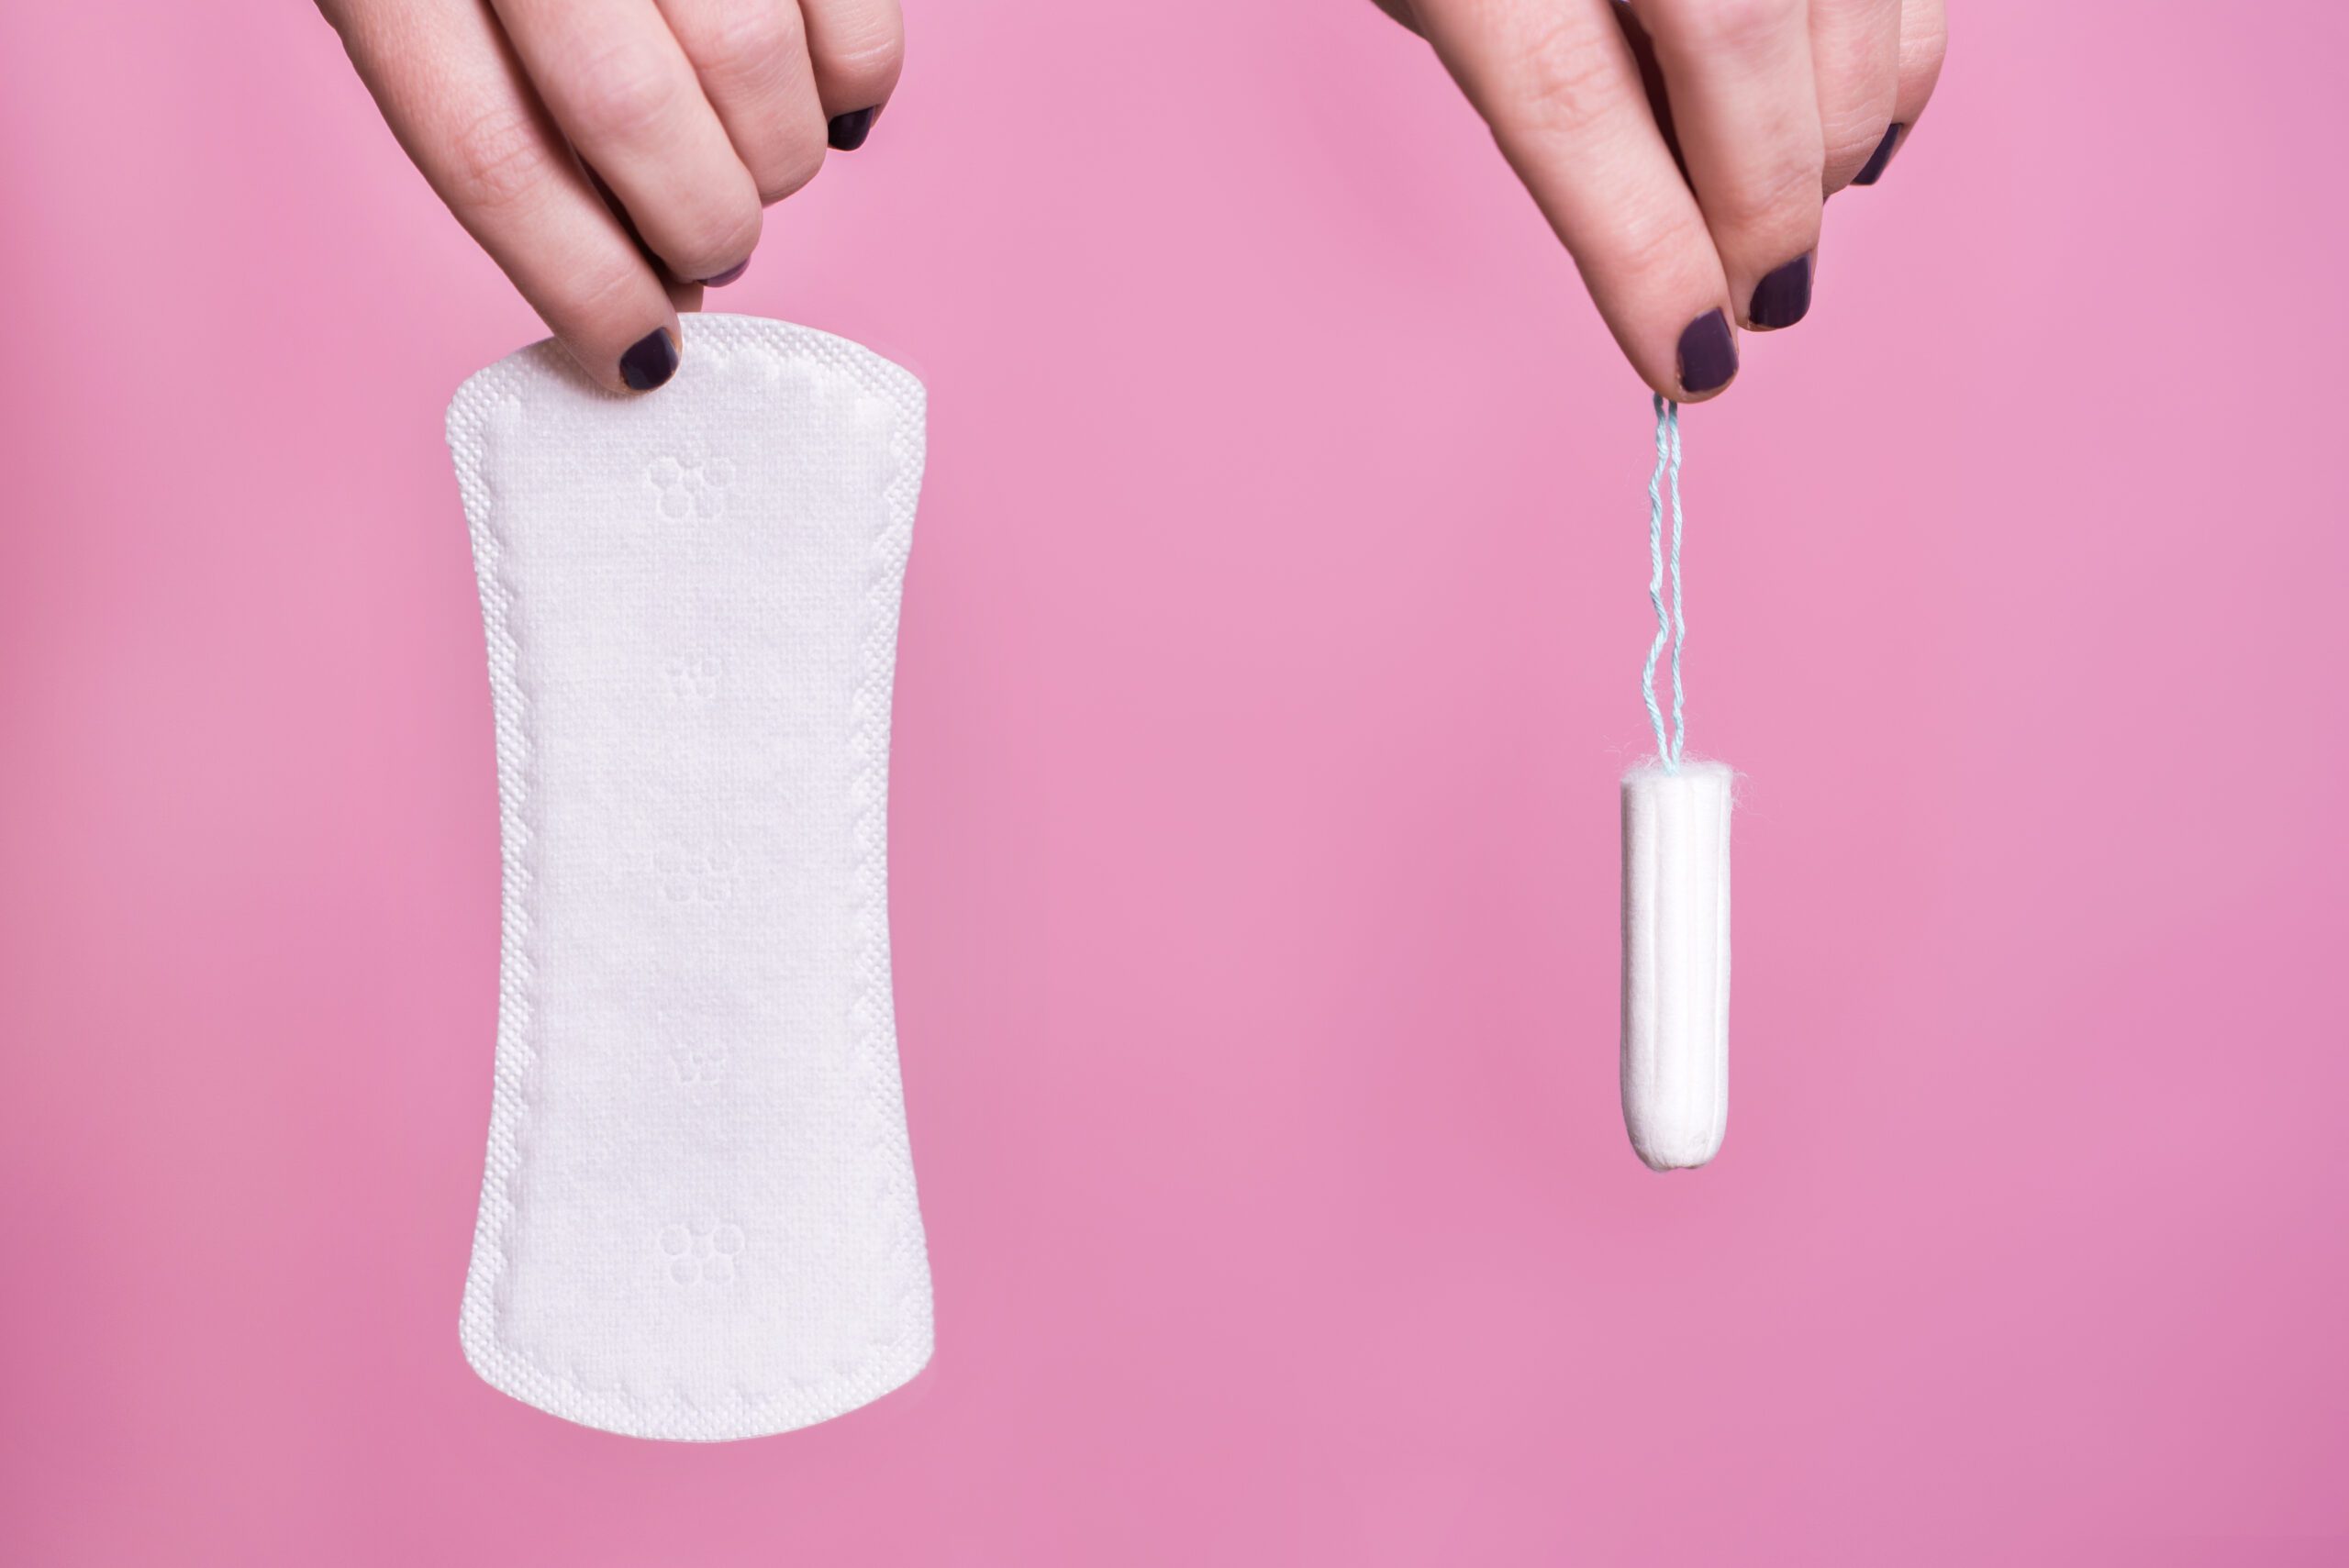 How to use a sanitary pad?